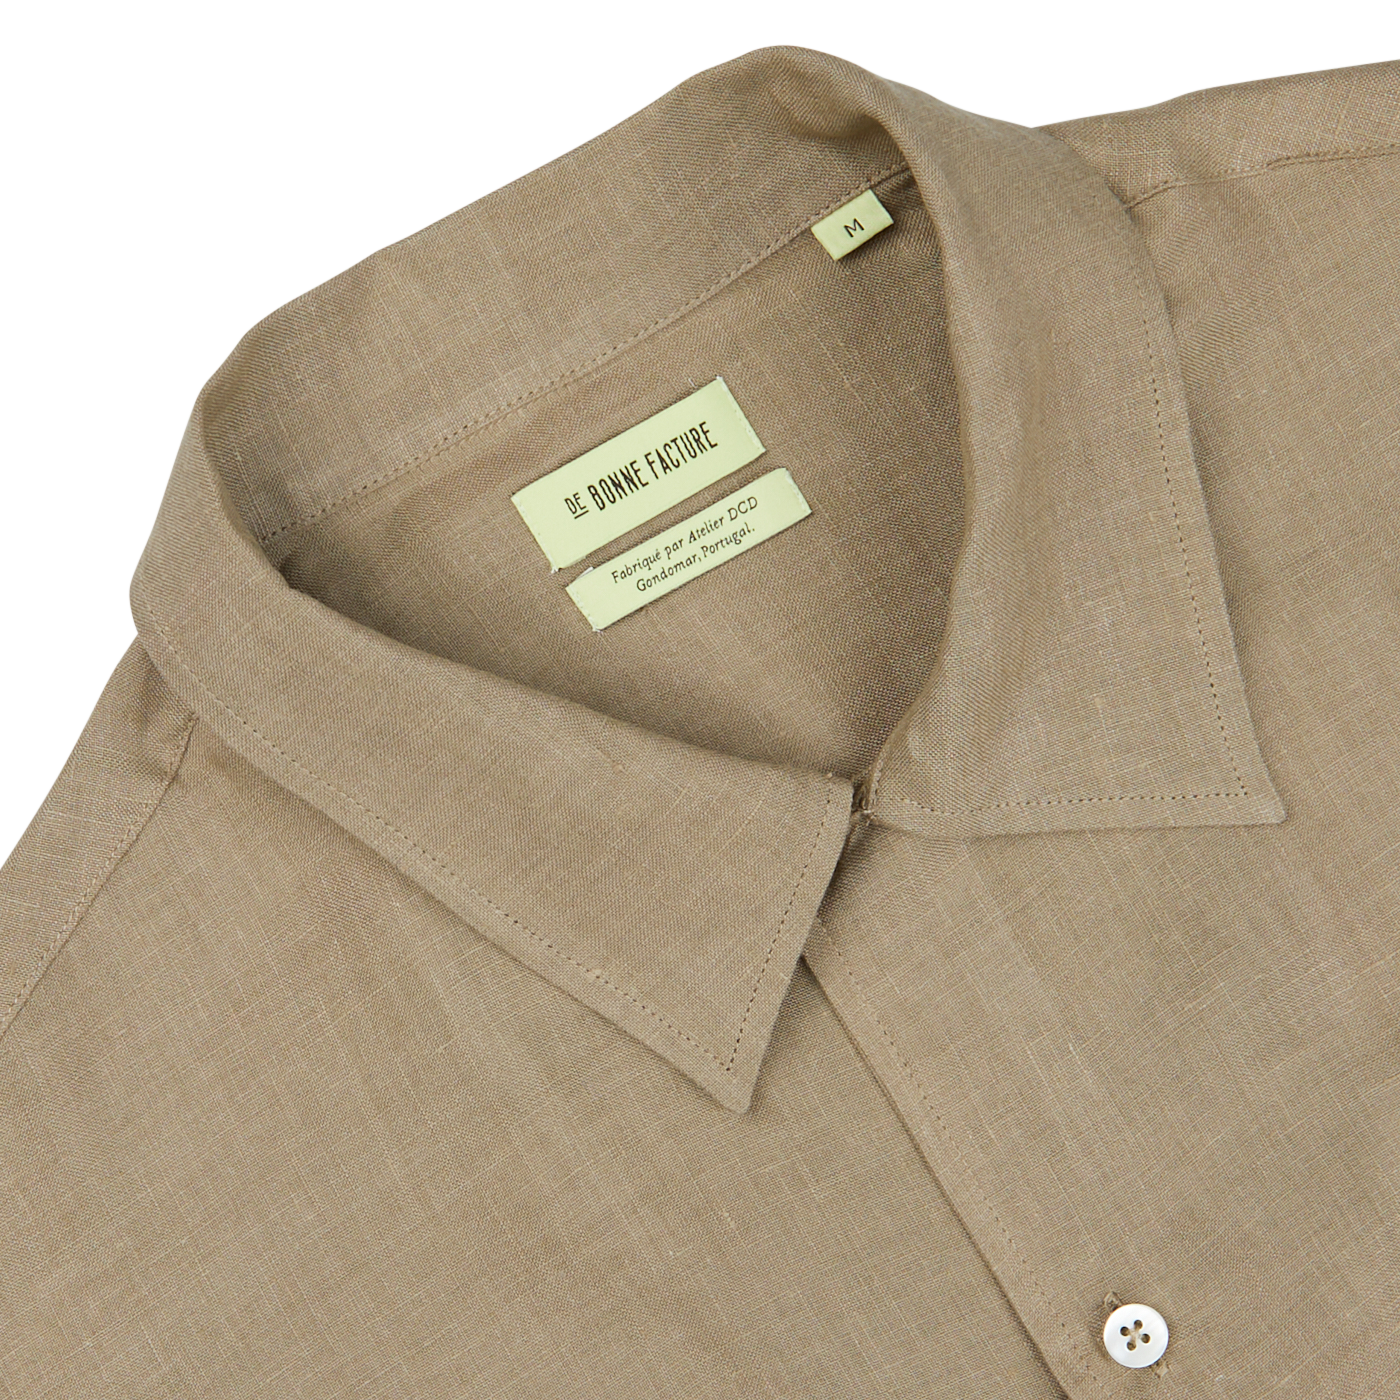 Close-up of a beige De Bonne Facture linen shirt collar with a label marking "Soft Grey Linen Floral Embroidered Shirt" and size information.